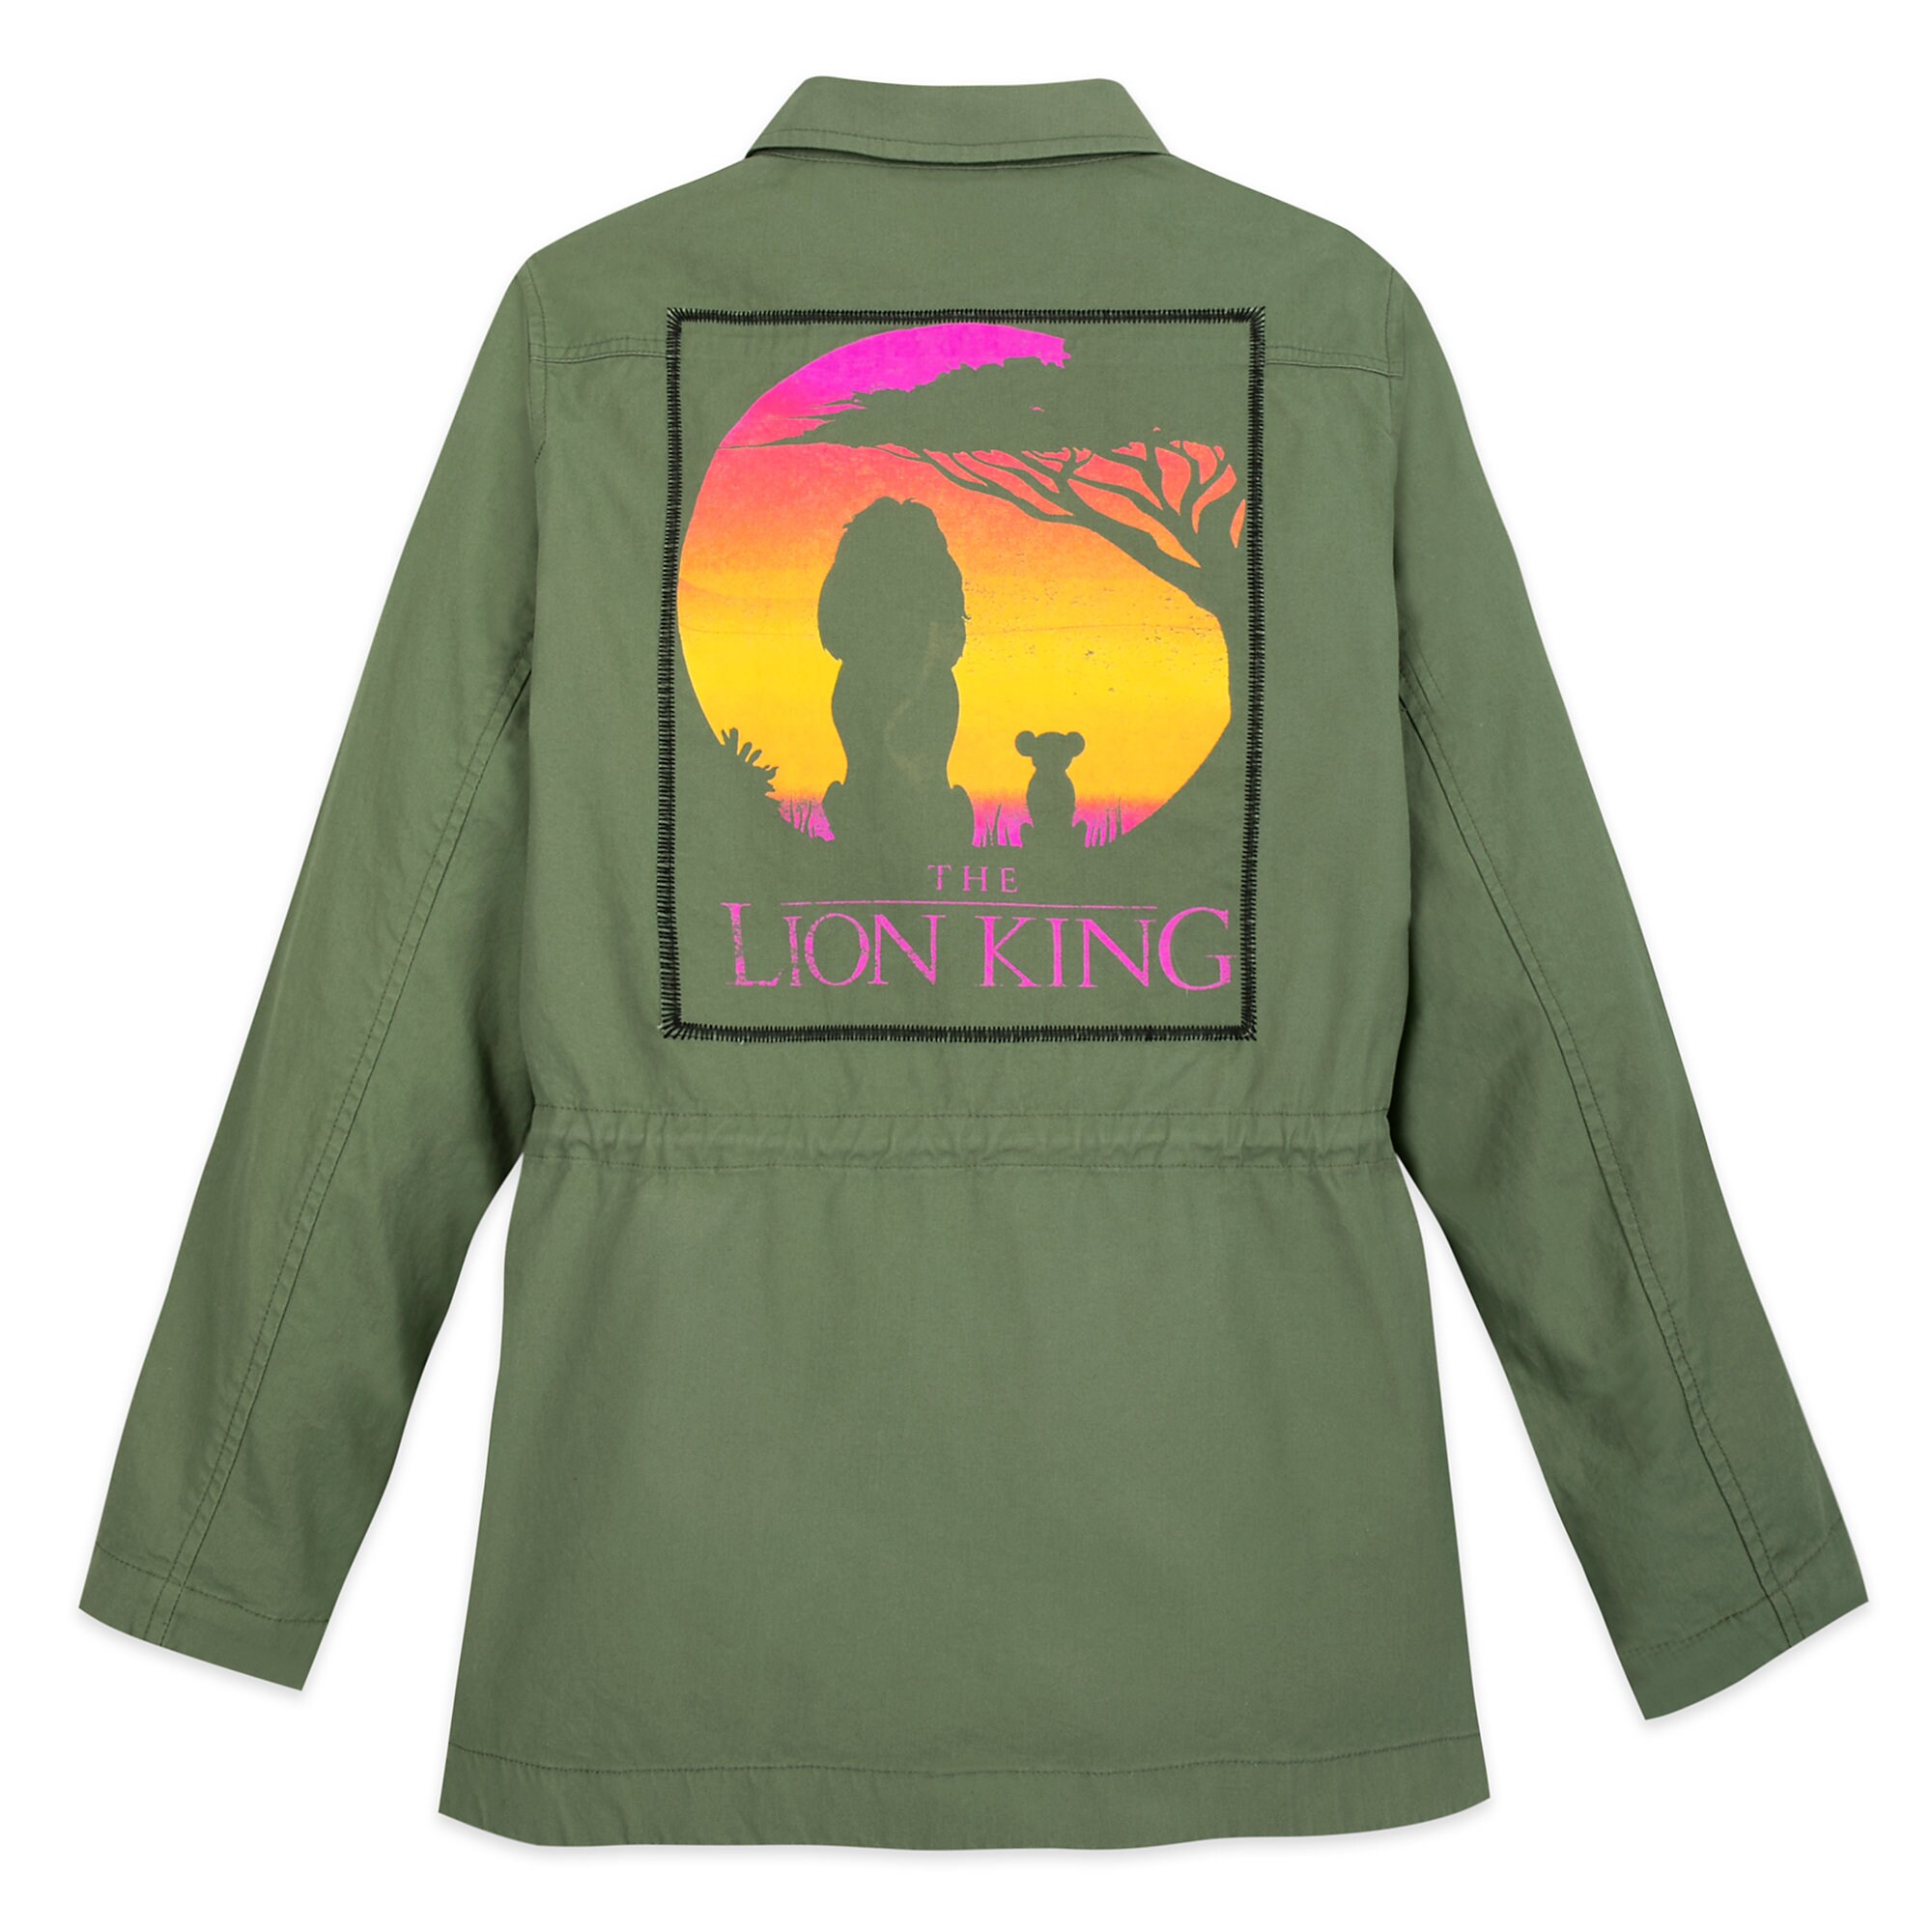 The Lion King Woven Jacket for Women